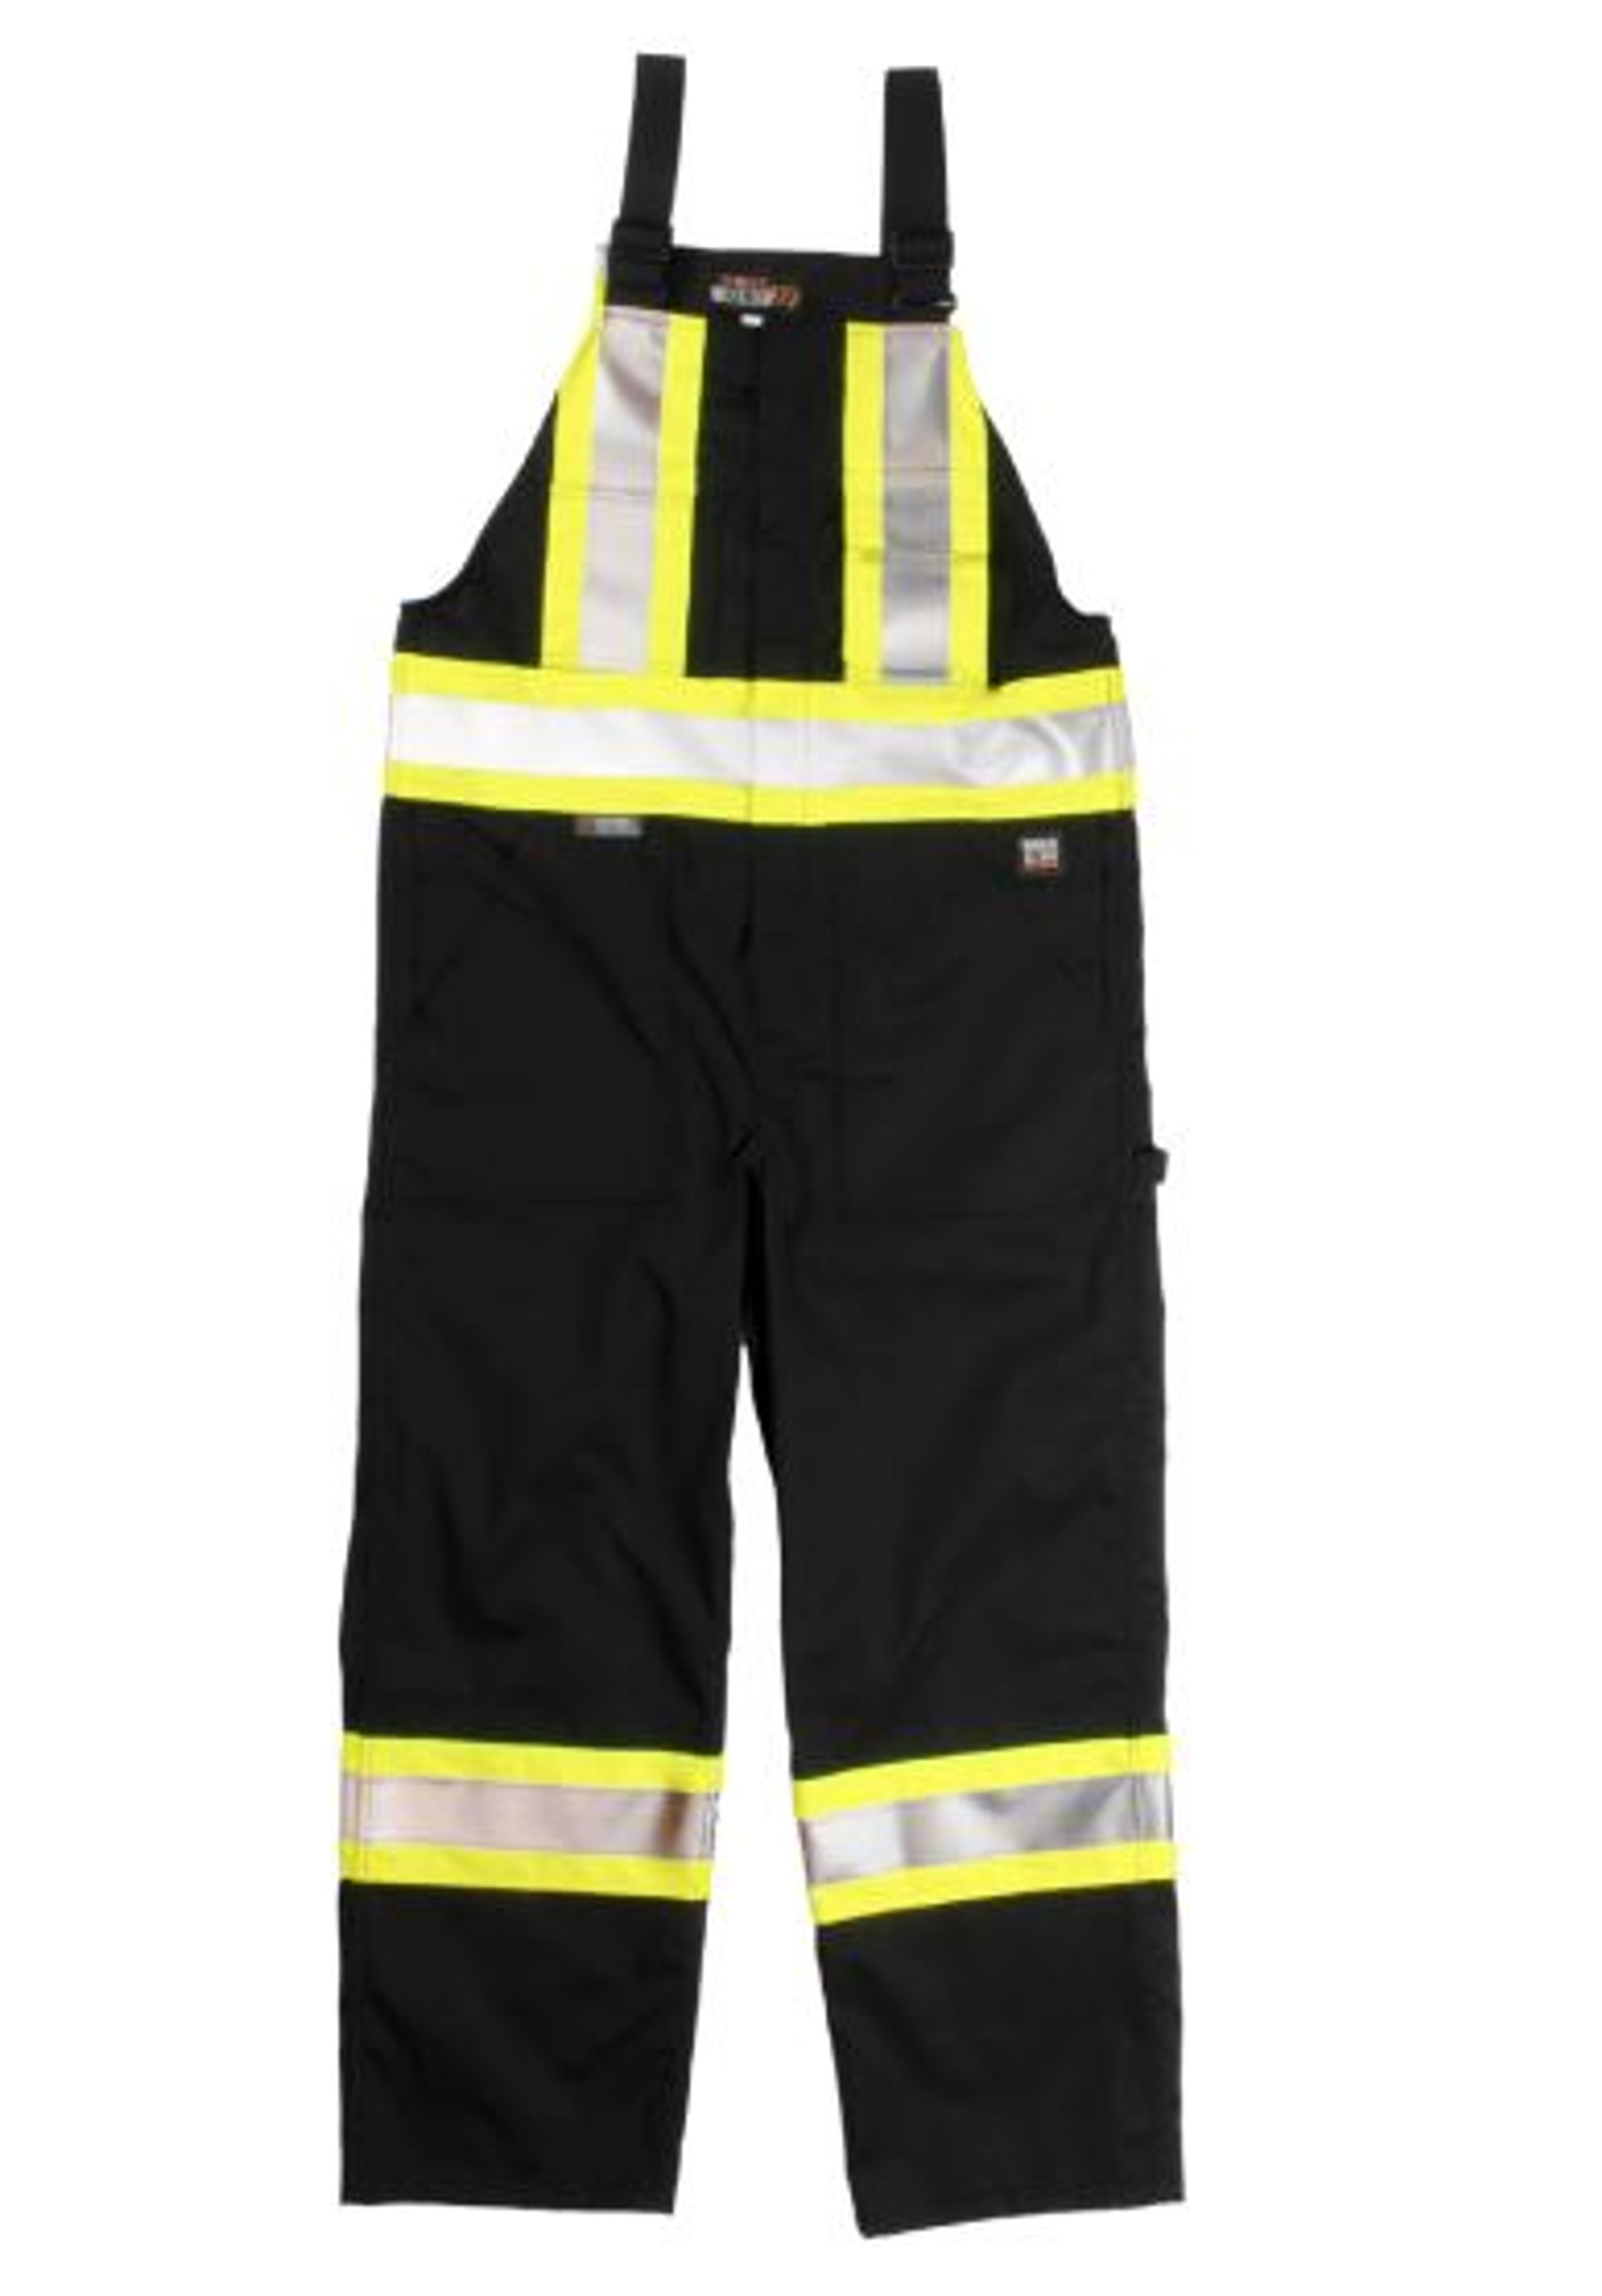 Unlined Safety Overall (Black) - 2 Pack